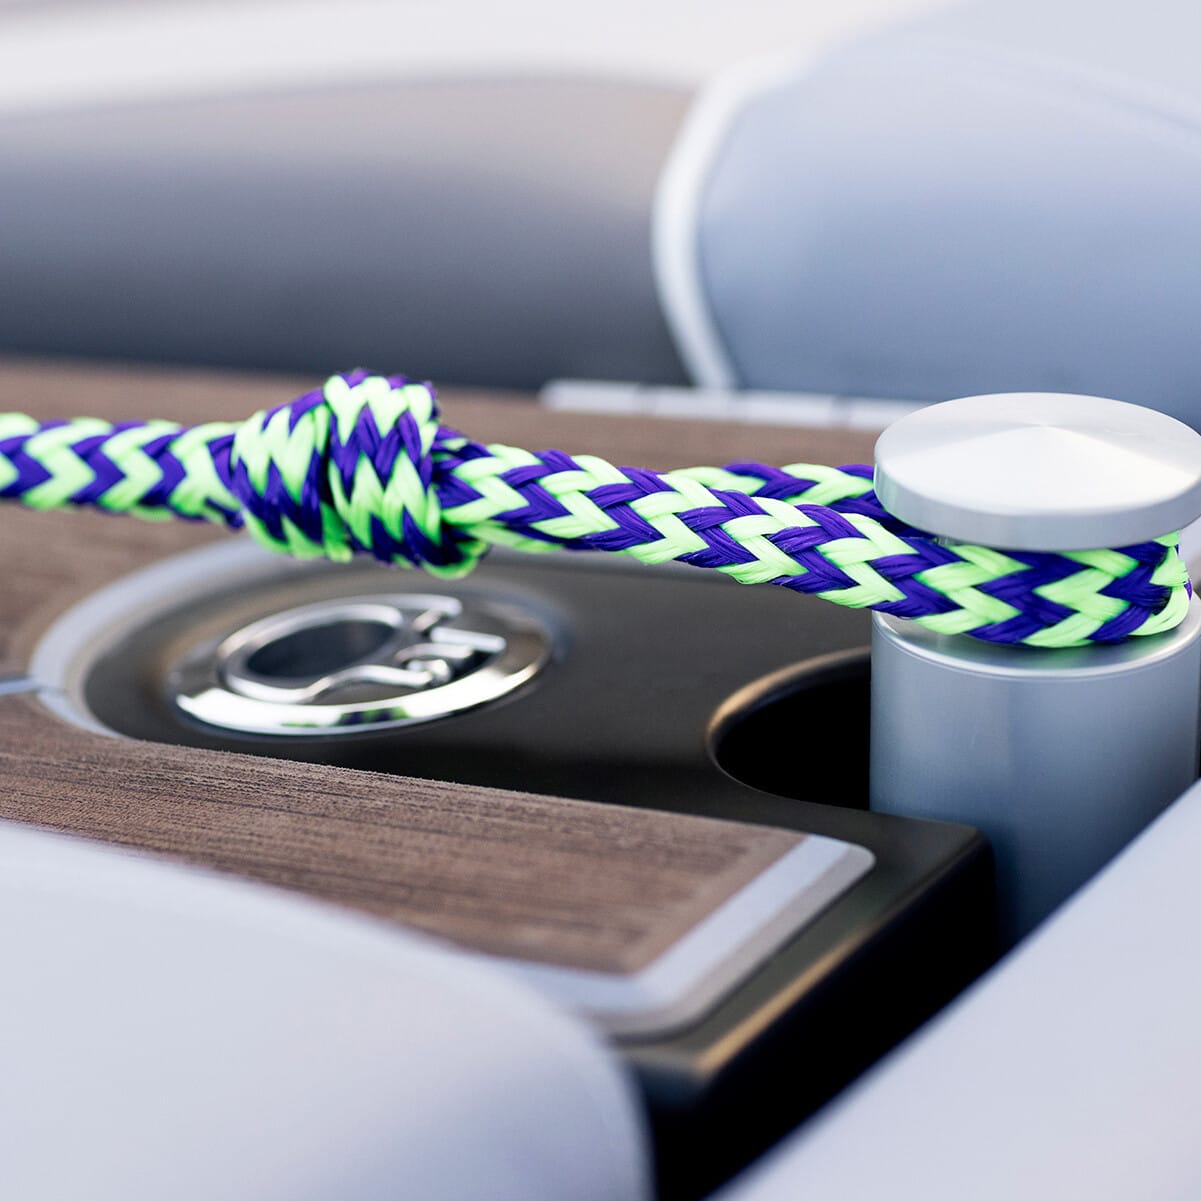 A purple and green braided rope is secured to a boat's cleat, situated between light gray cushioned seats and a wooden deck area.